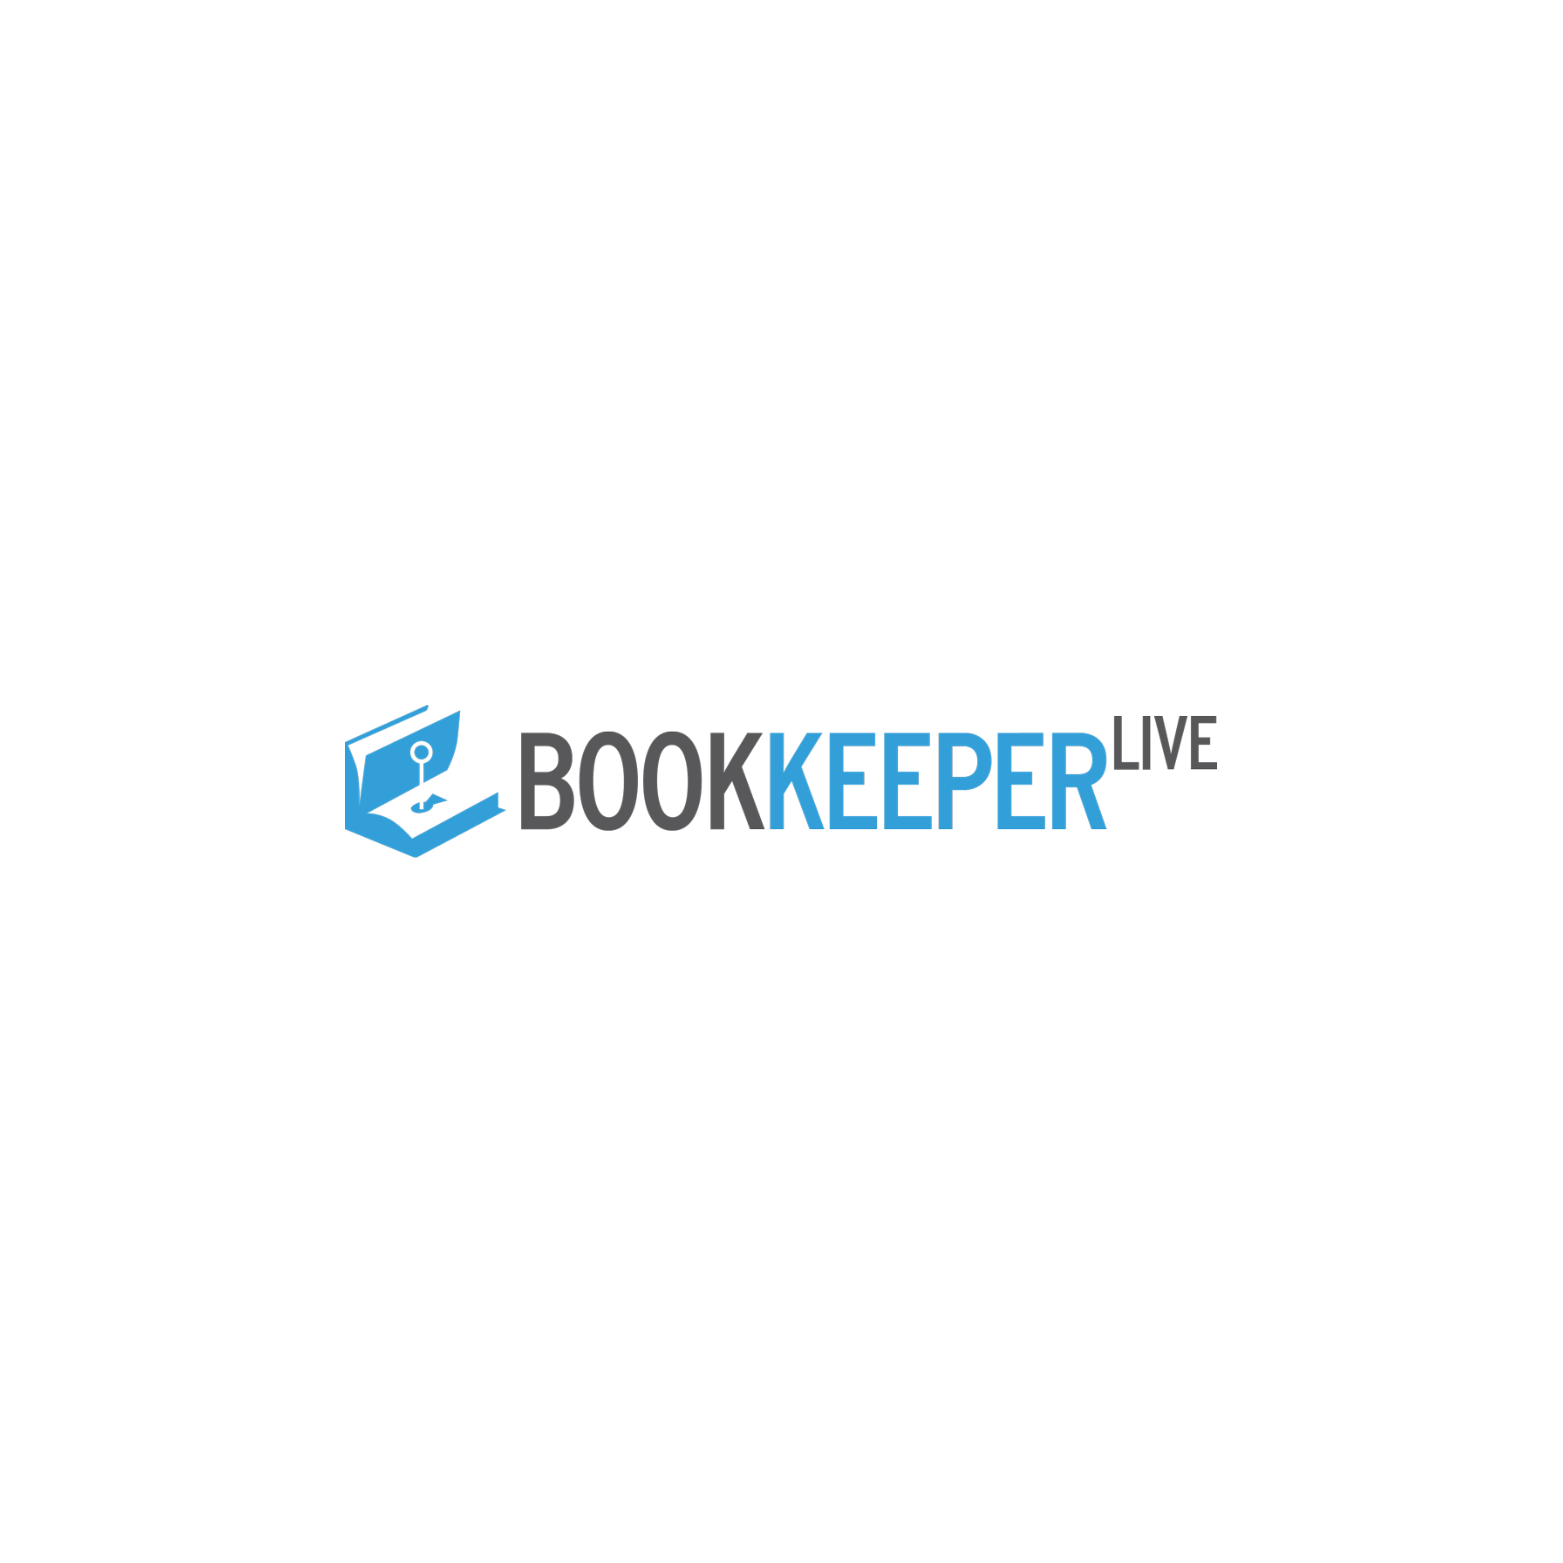 BookkeeperLive|IT Services|Professional Services